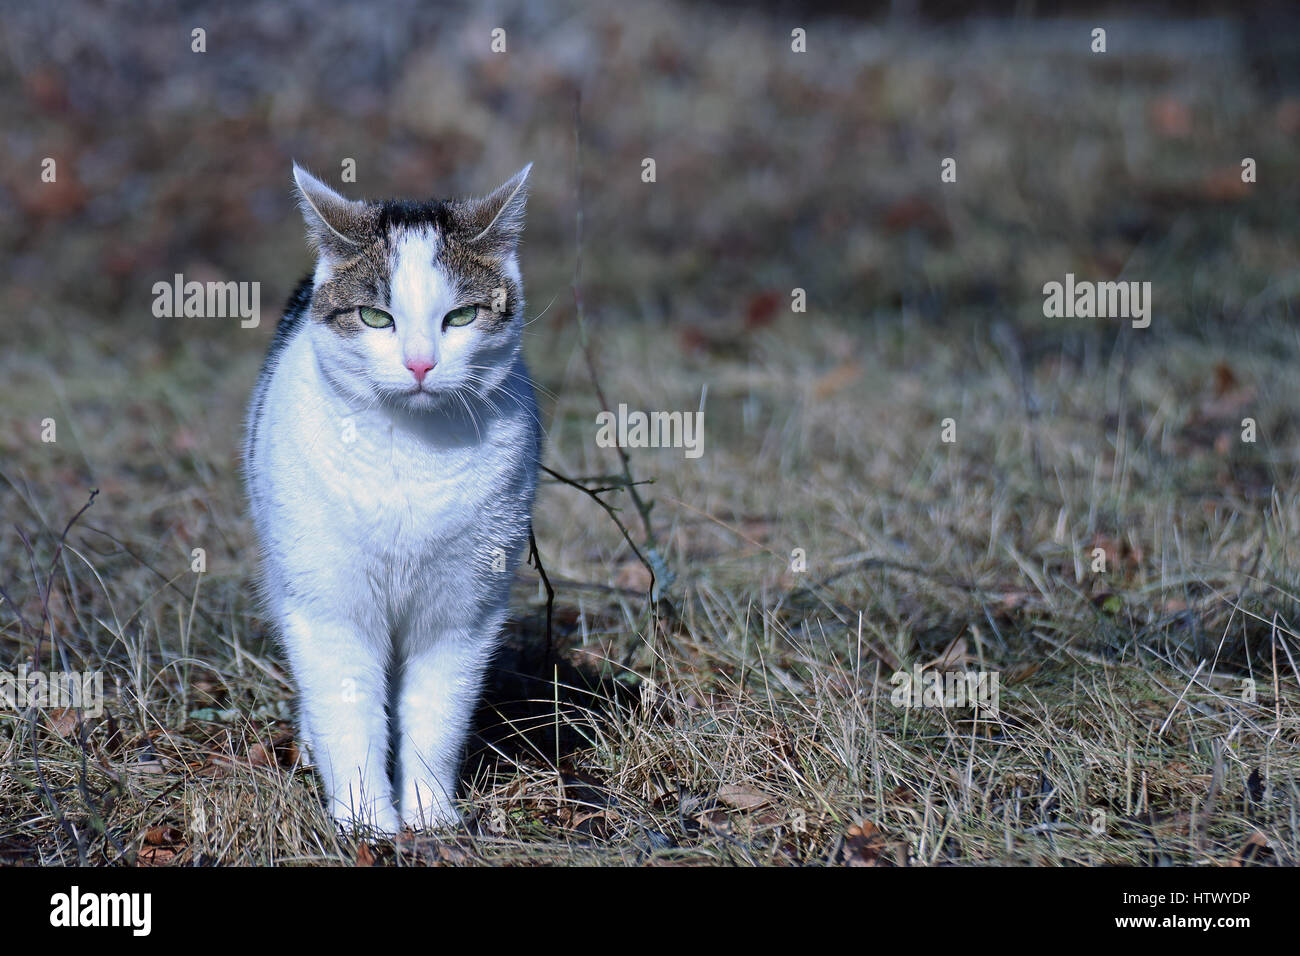 Cat staring at camera in the garden. Stock Photo